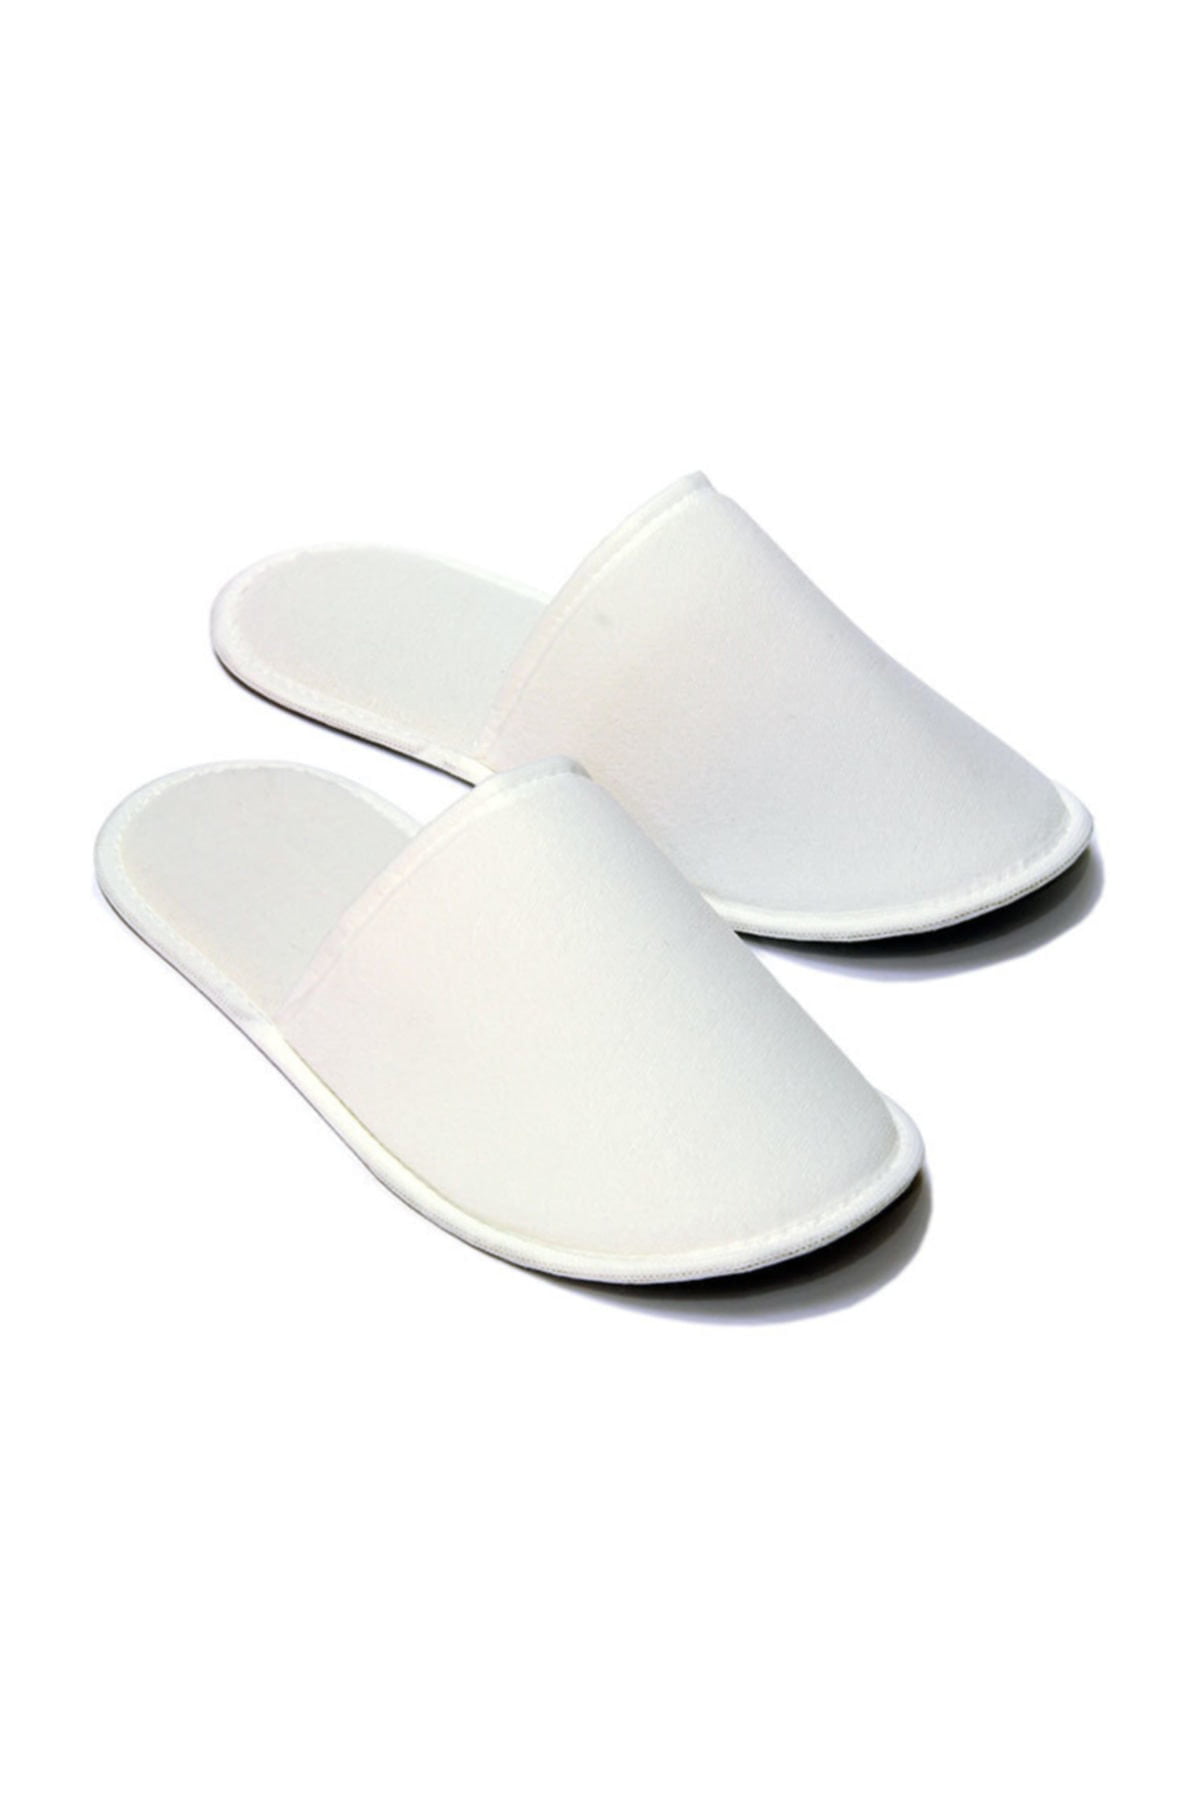 WHITE TERRY TOWELLING SPA SLIPPERS MENS WOMENS HOTEL WEDDING OPEN TOE SHOES 